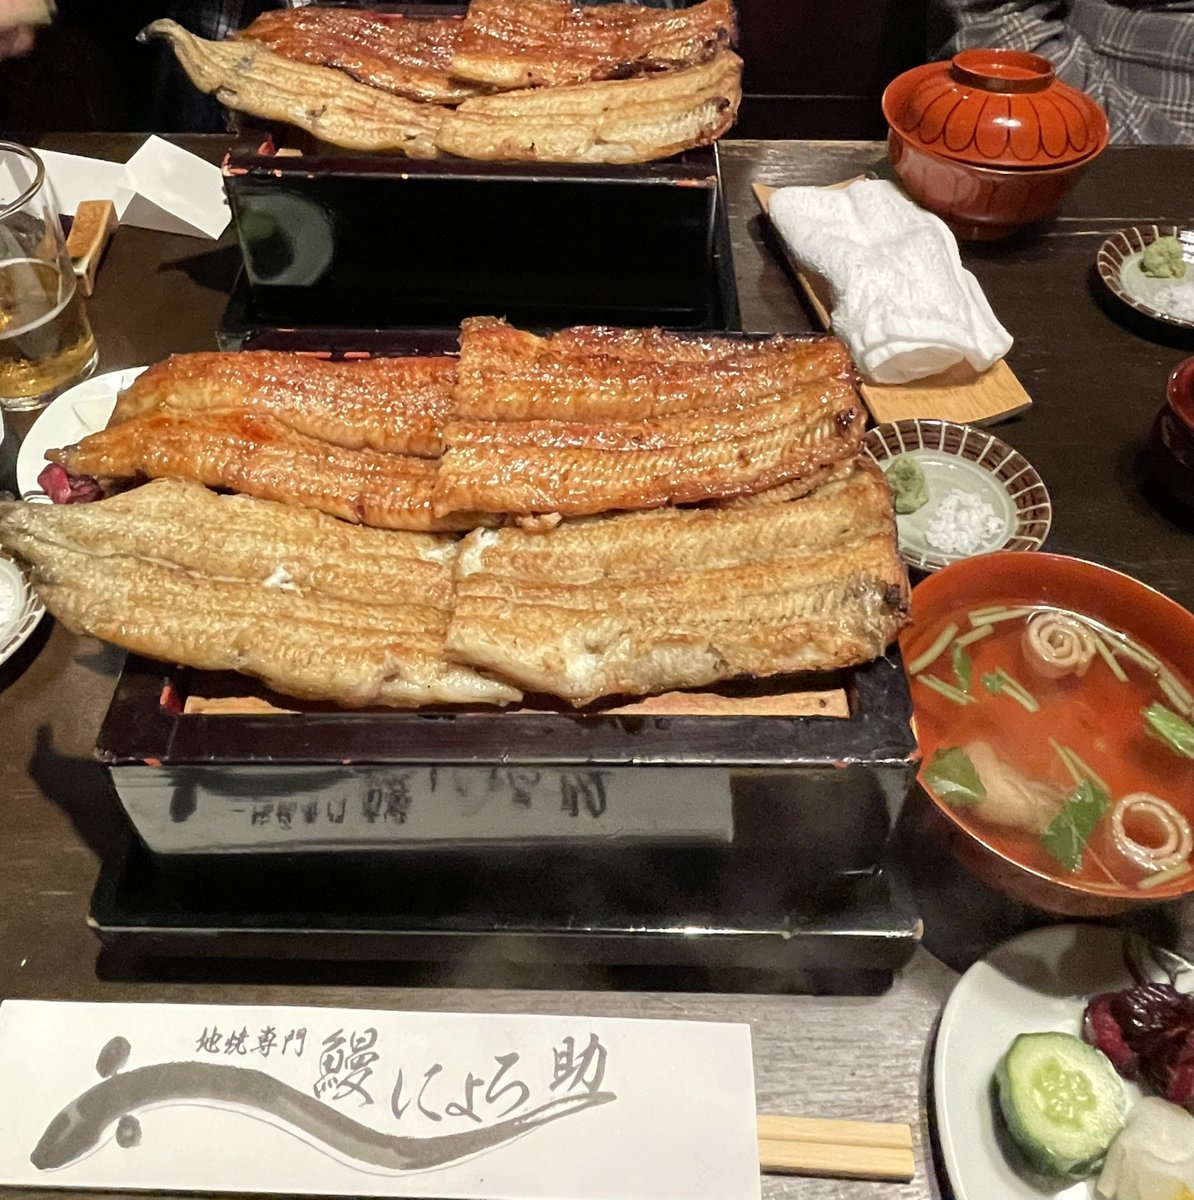 We've eaten roasted eel with and without sauce in Kyoto.
#kyoto